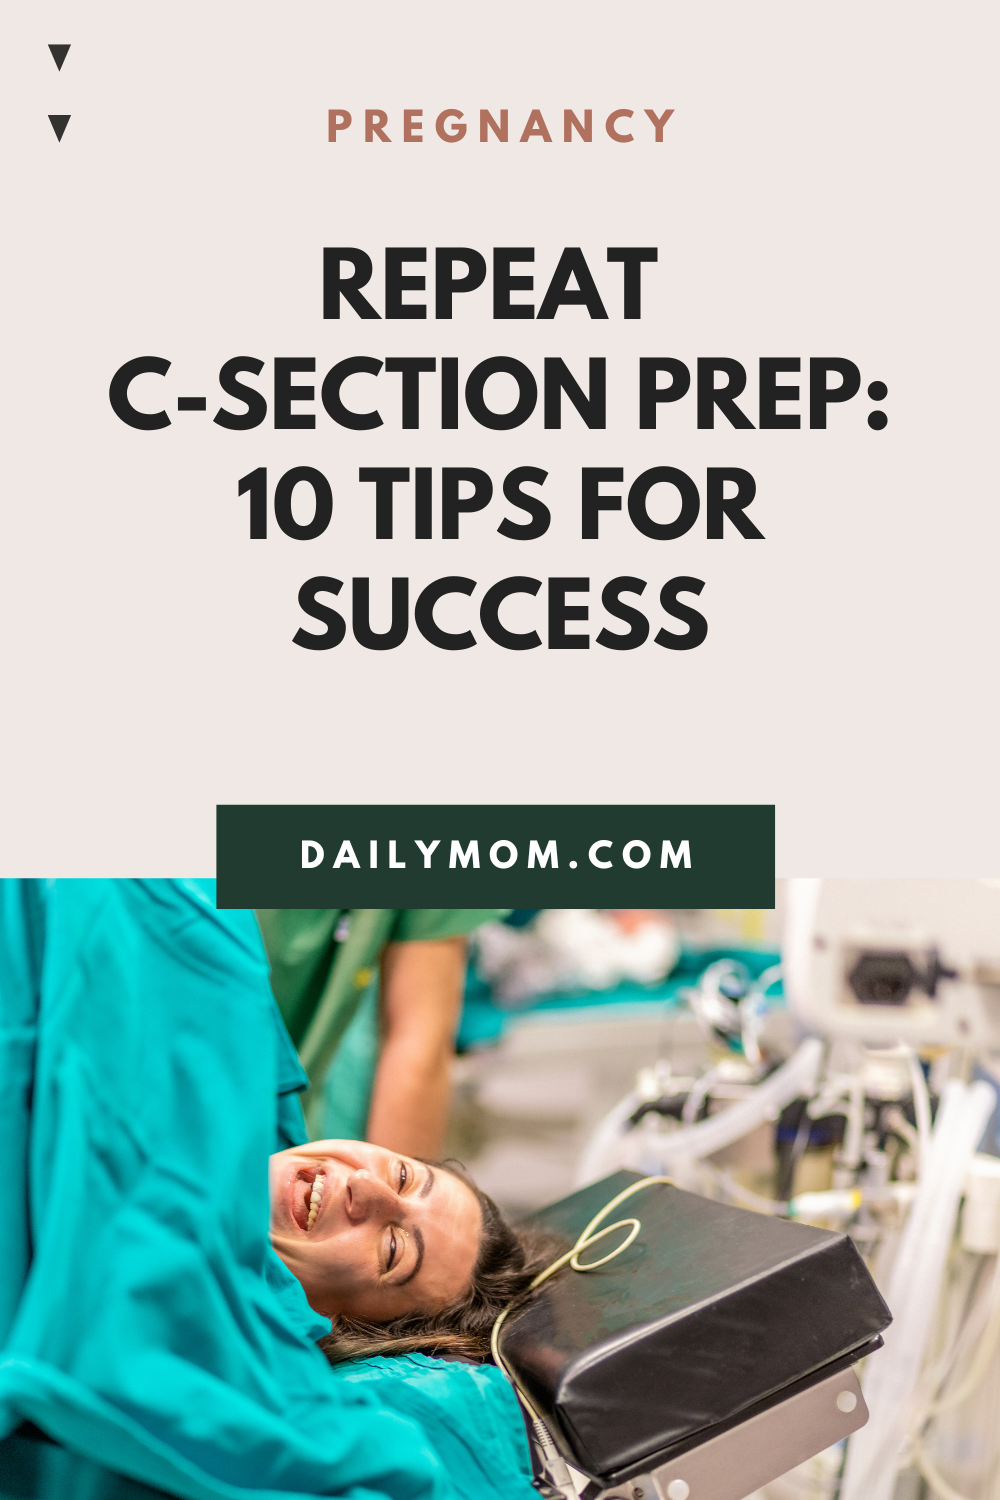 Daily Mom Parent Portal Repeat C-Section